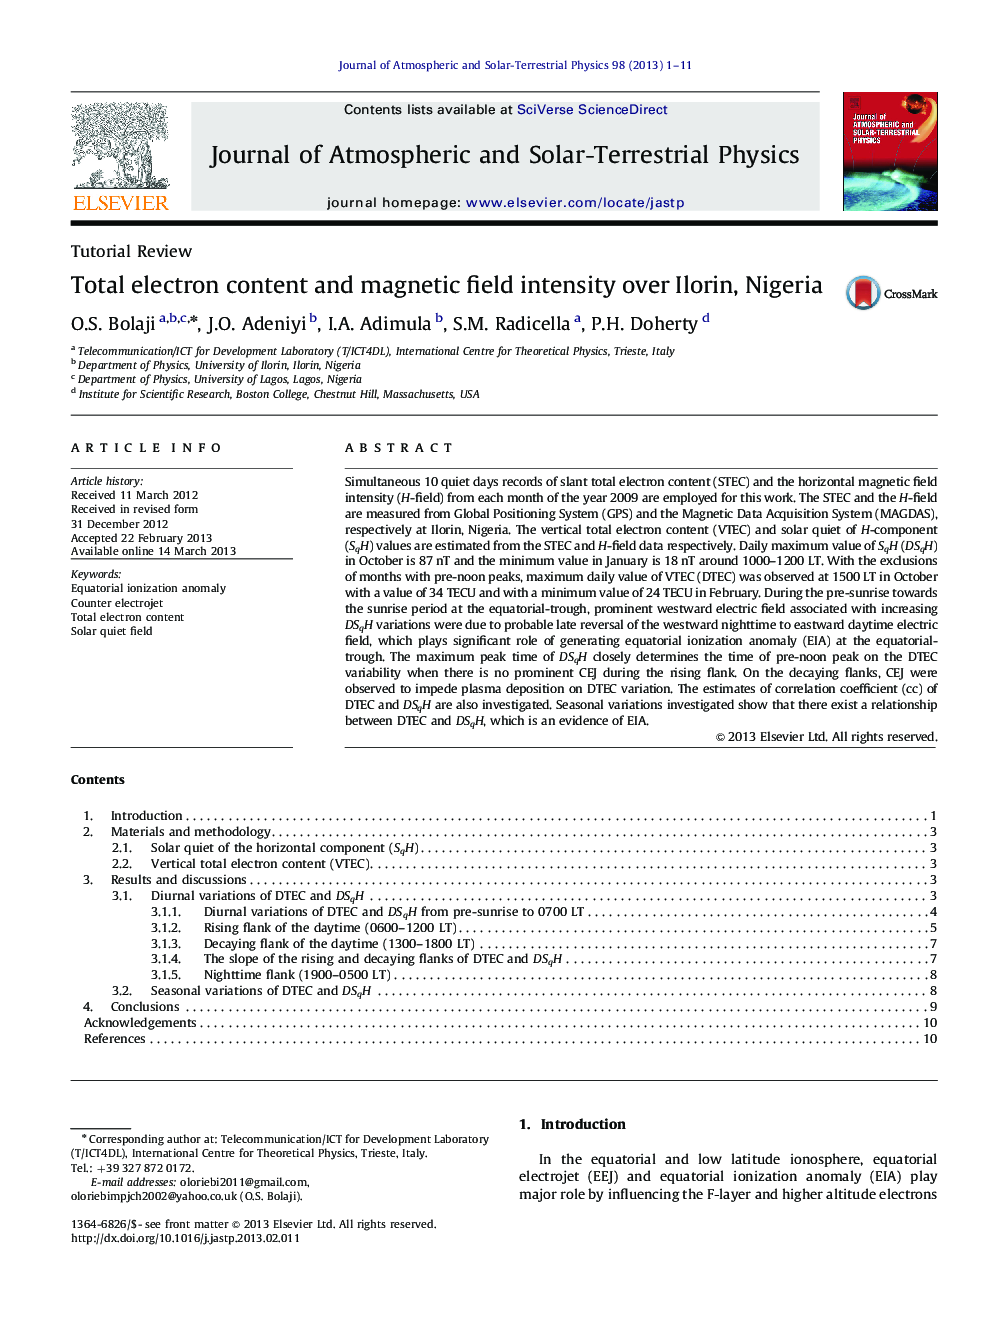 Total electron content and magnetic field intensity over Ilorin, Nigeria